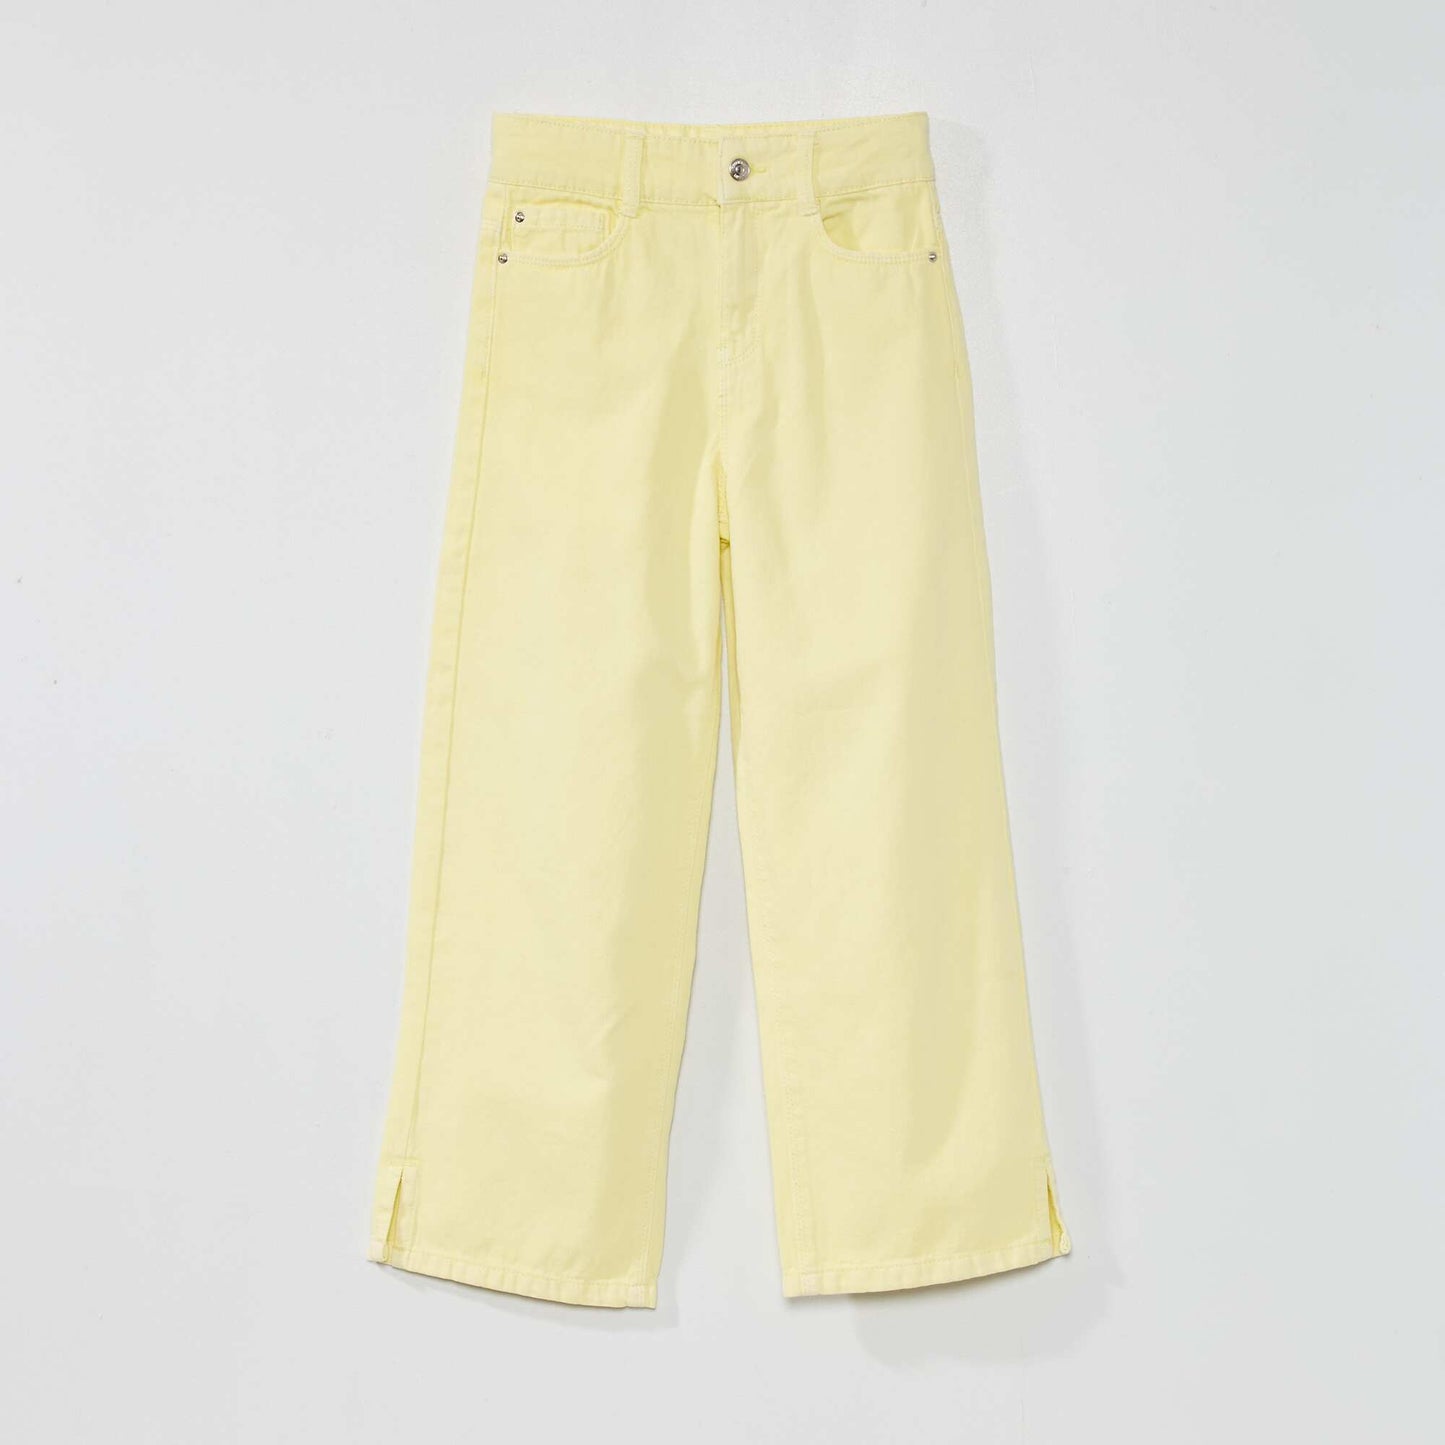 Wide-leg trousers - 5 pockets YELLOW